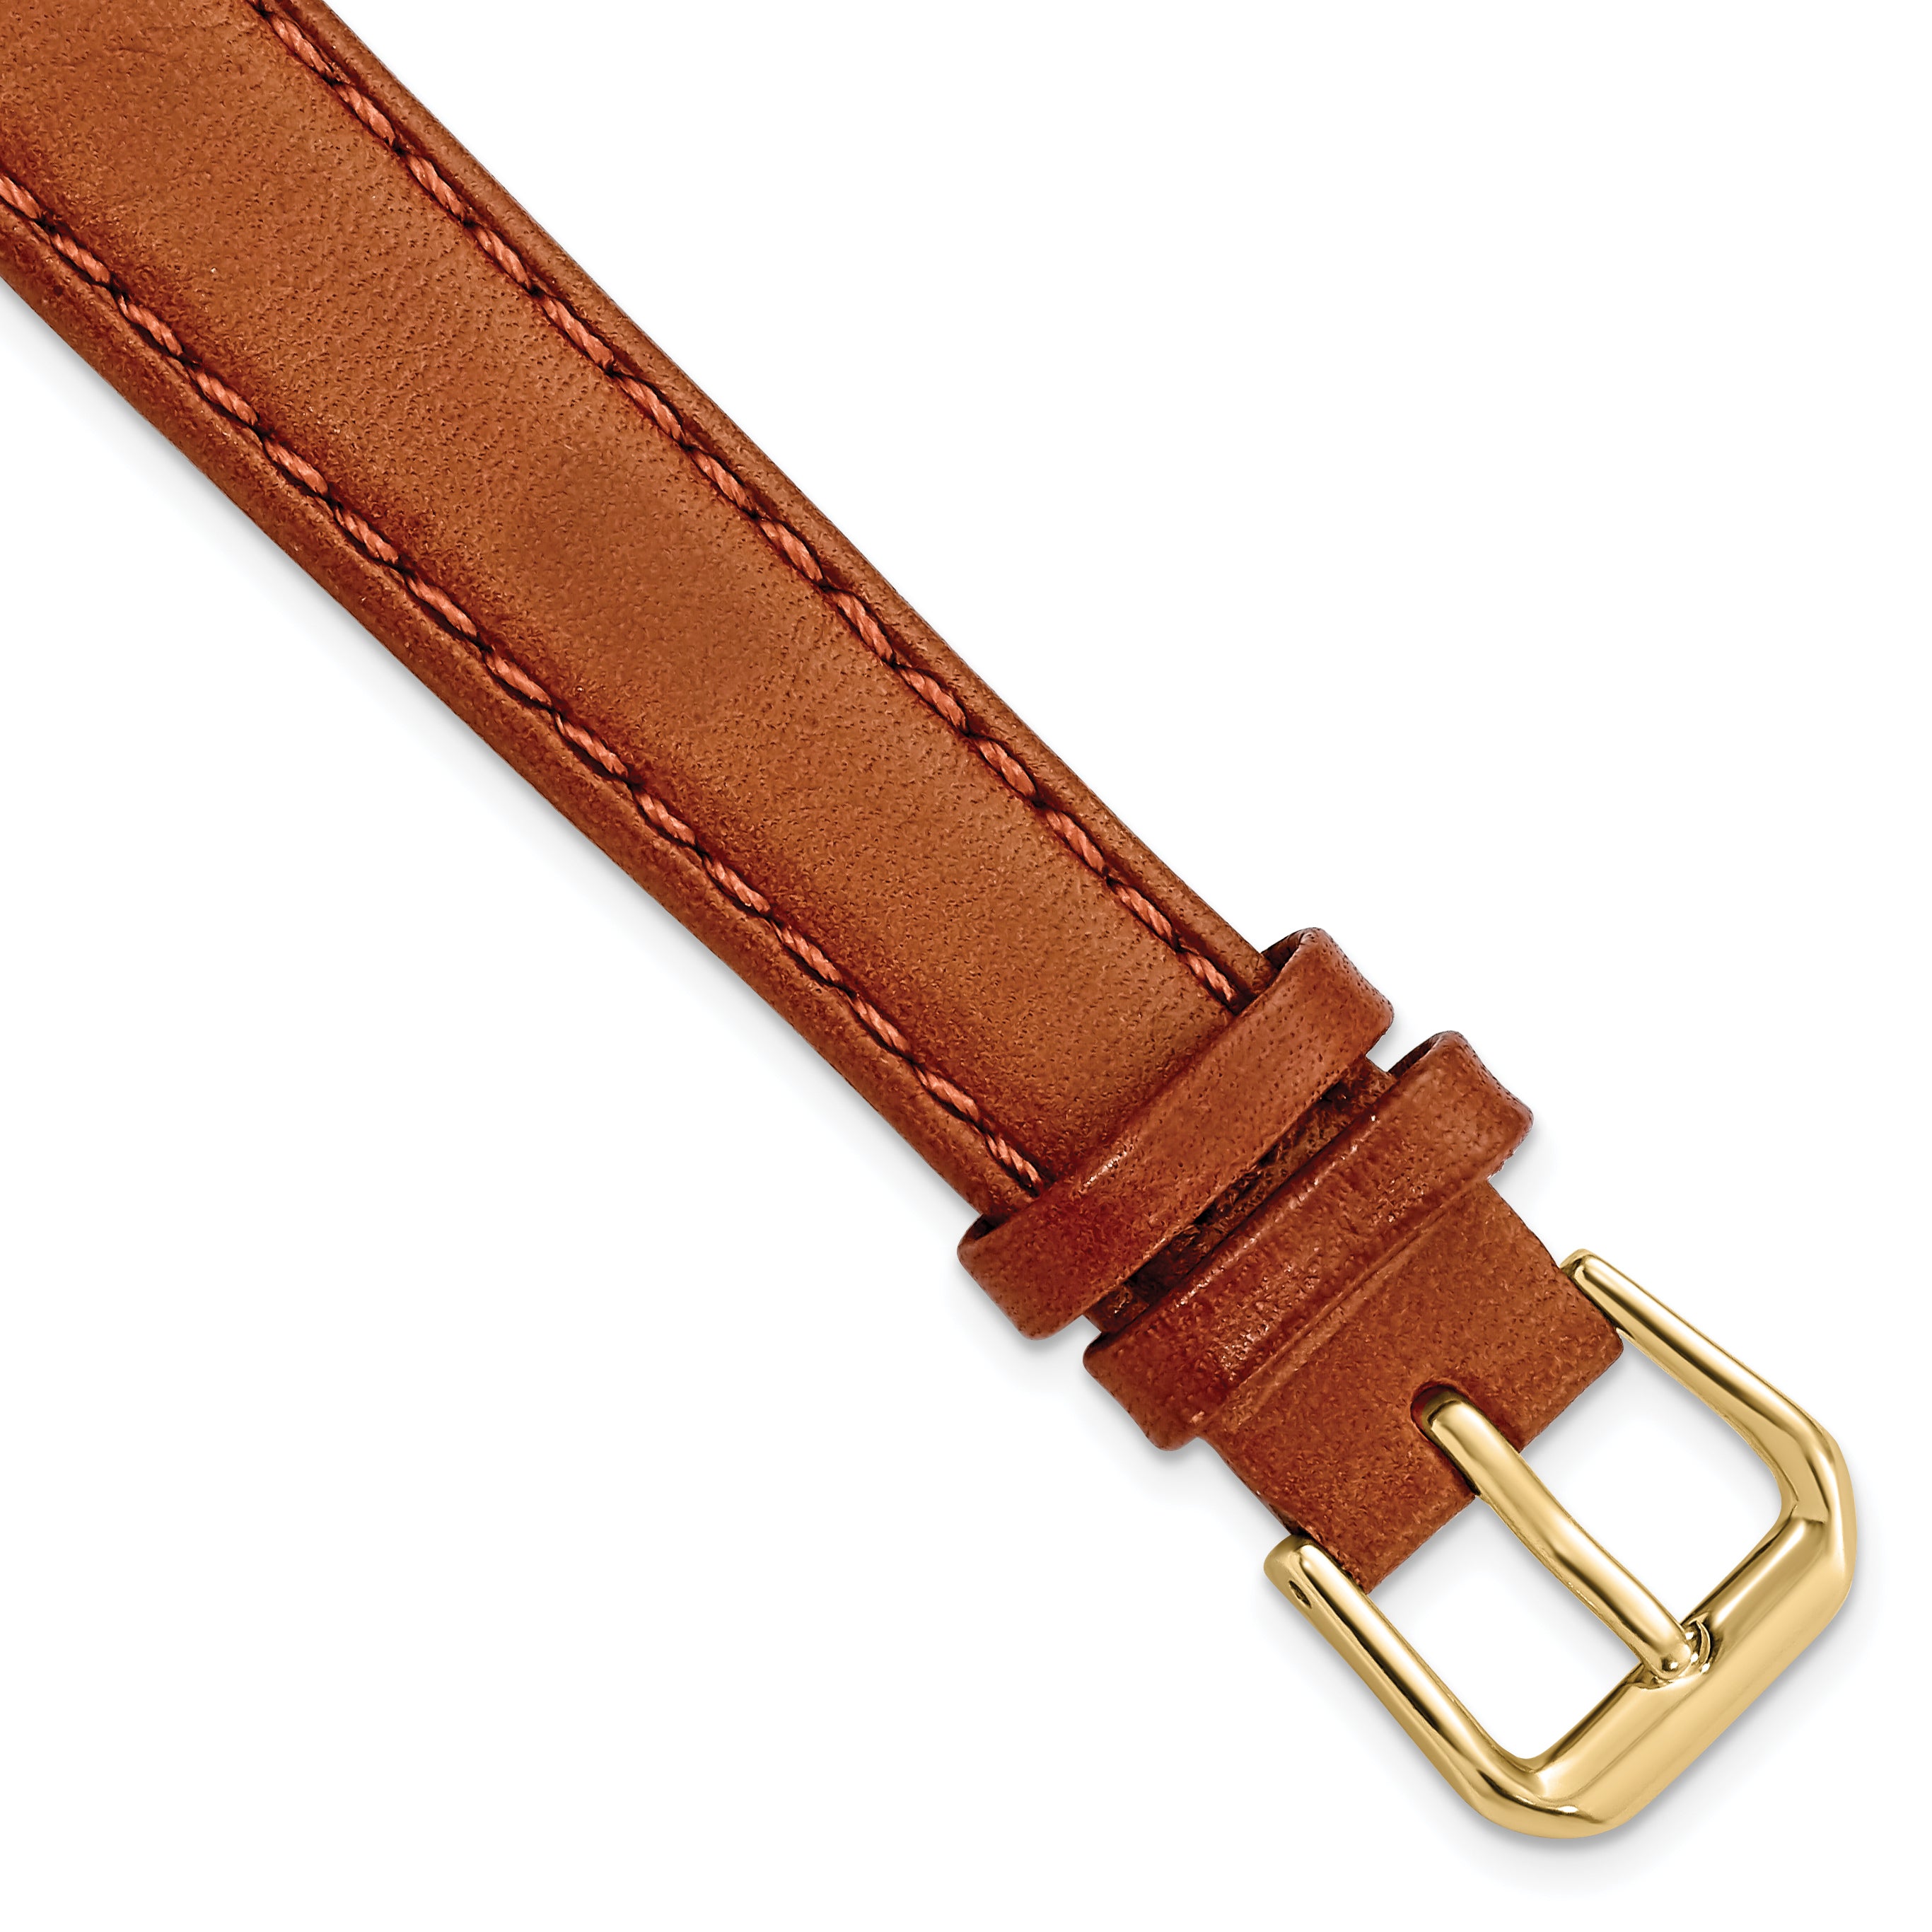 DeBeer 14mm Havana Italian Leather with Gold-tone Buckle 6.75 inch Watch Band